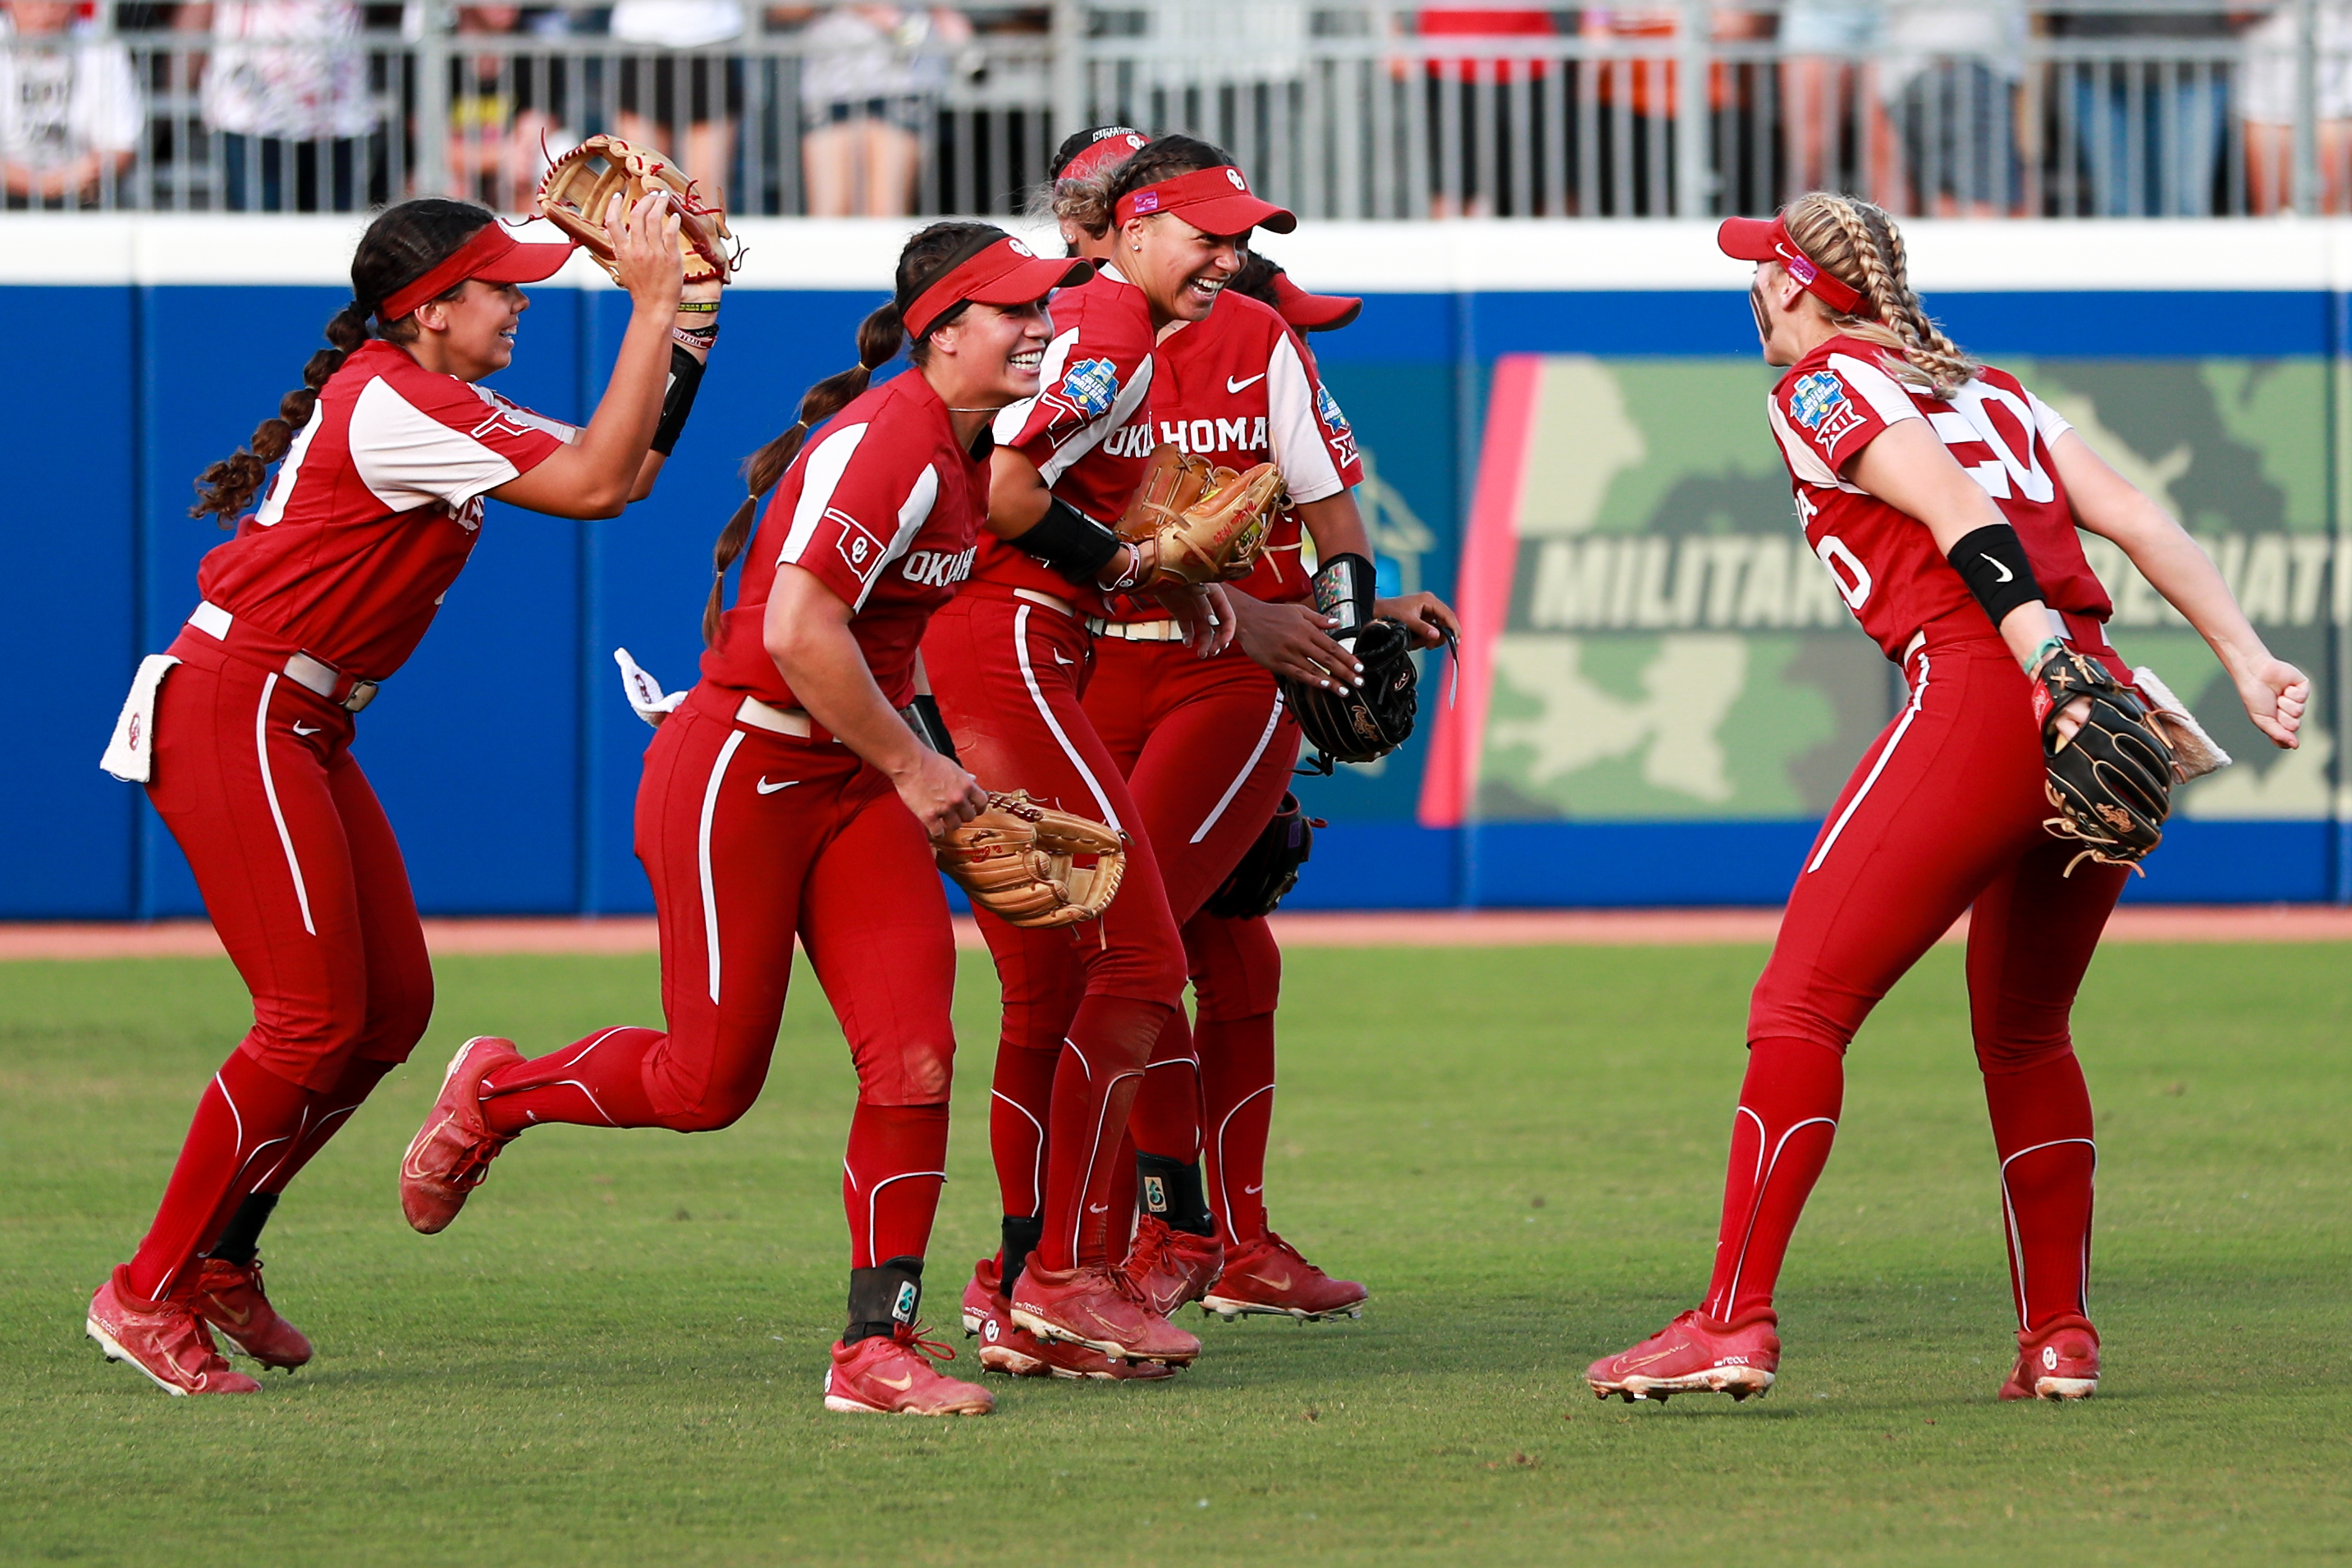 Oklahoma sweeps Texas to win the 2022 Women's College World Series